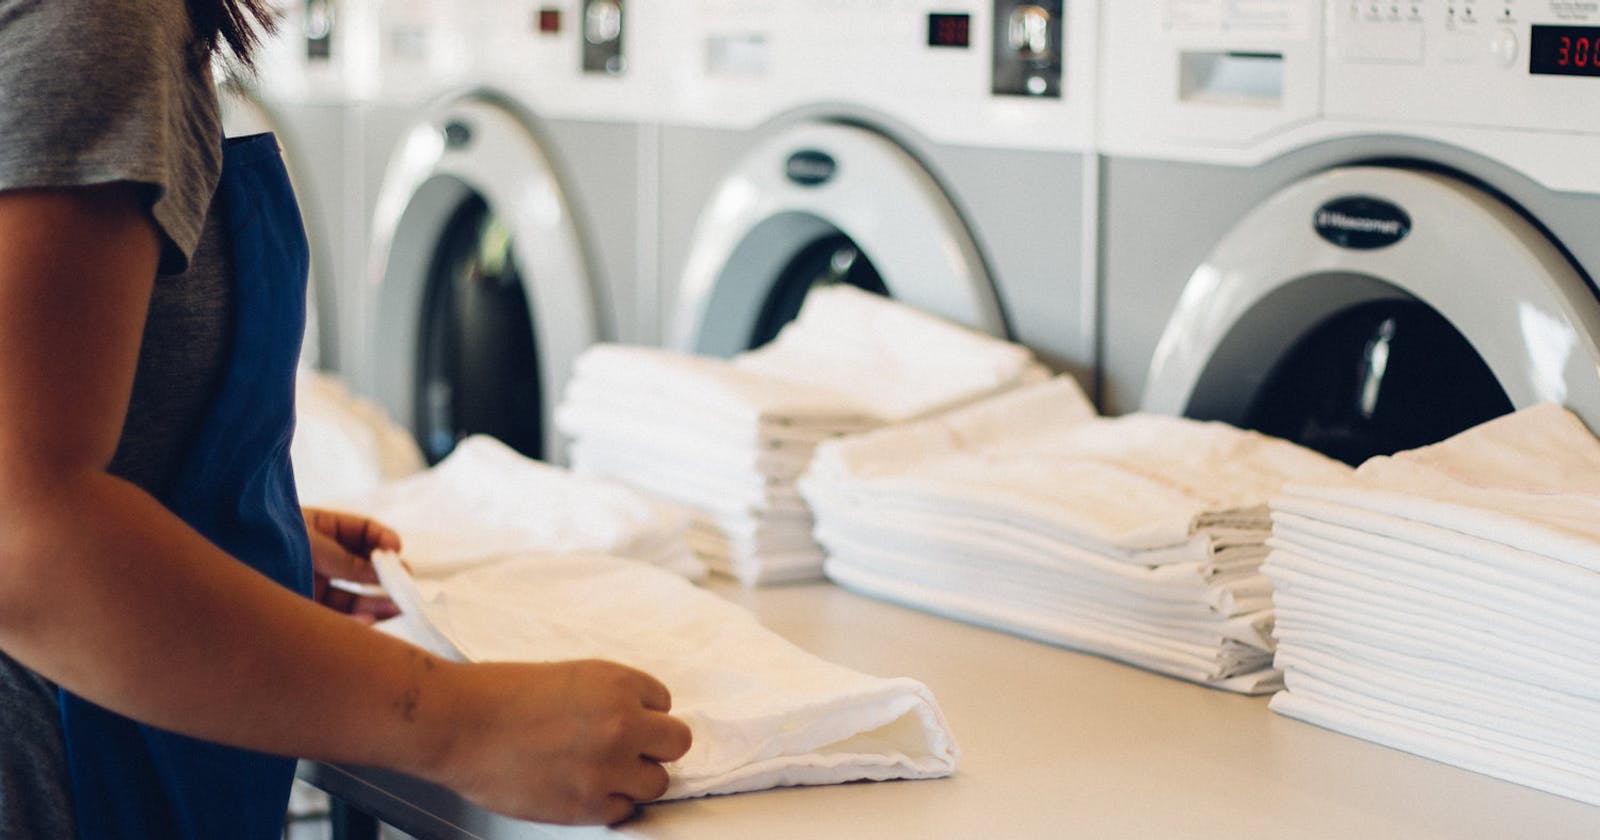 Tips for Getting the Most Out of Your Commercial Laundry Service Provider